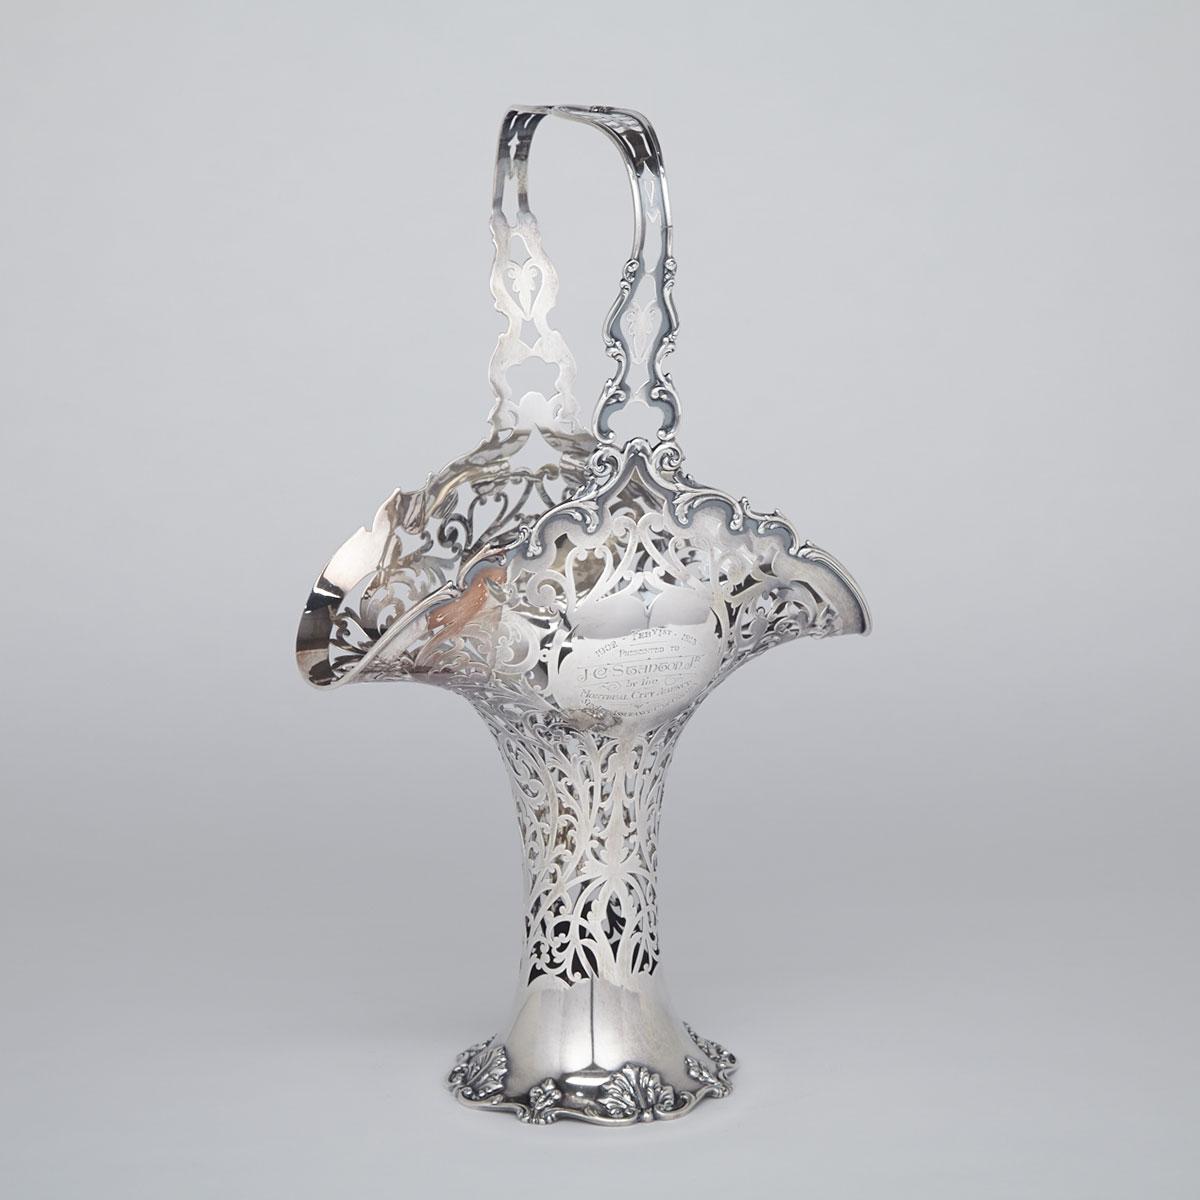 Canadian Silver Pierced Flower Basket, probably Montreal, c. 1913